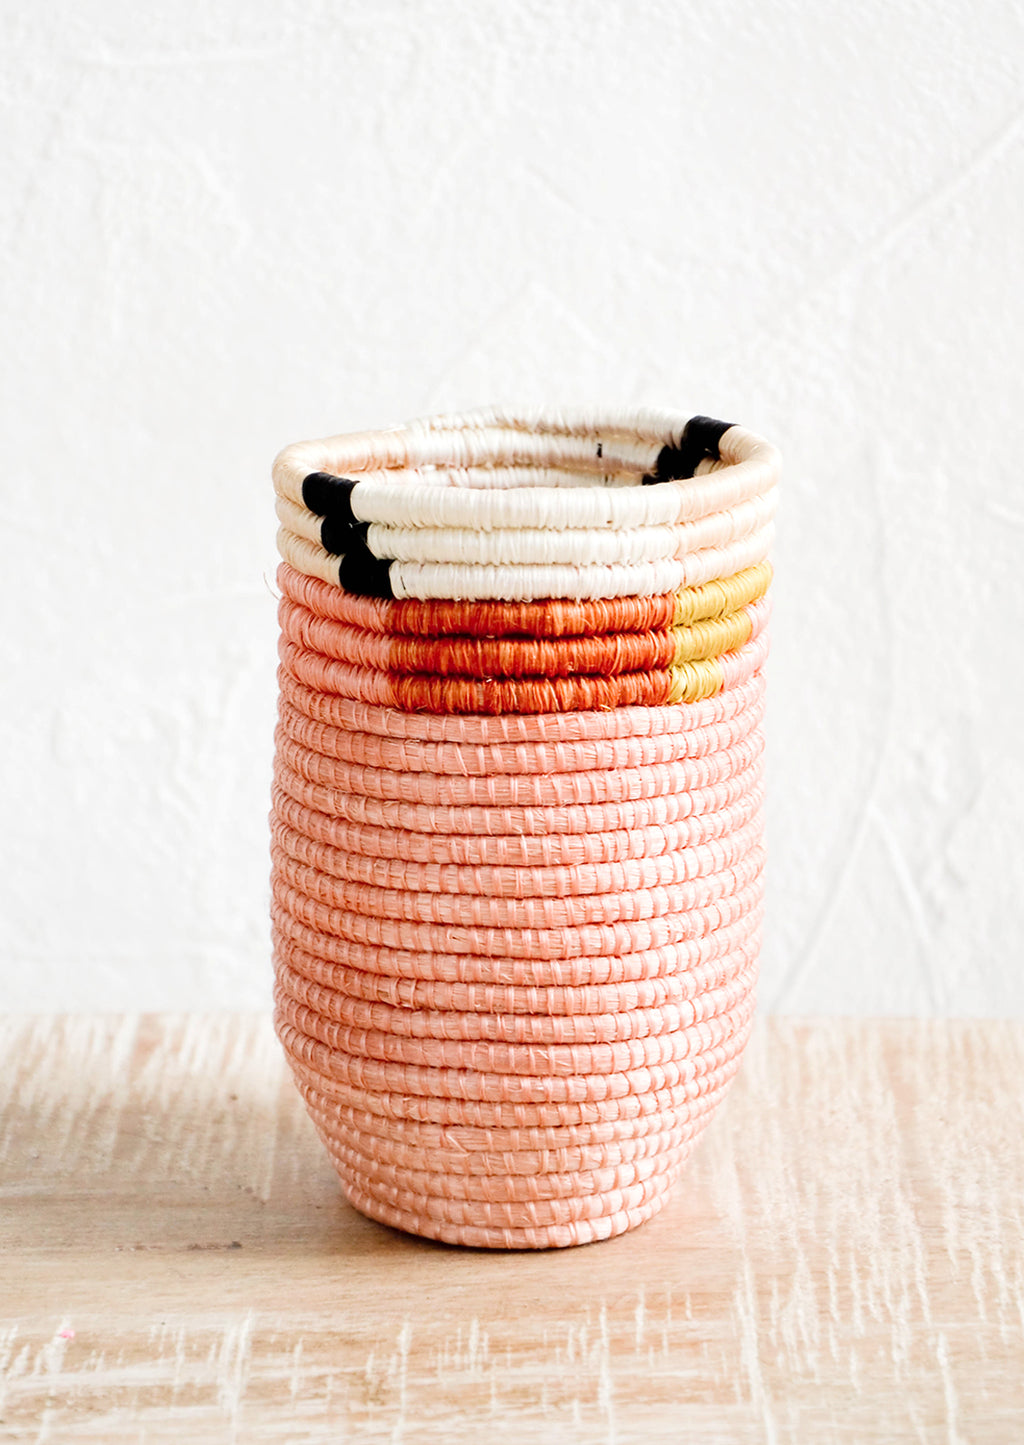 2: Pencil cup shaped woven sweetgrass basket in pink color combo with geometric trim, sitting on a table.